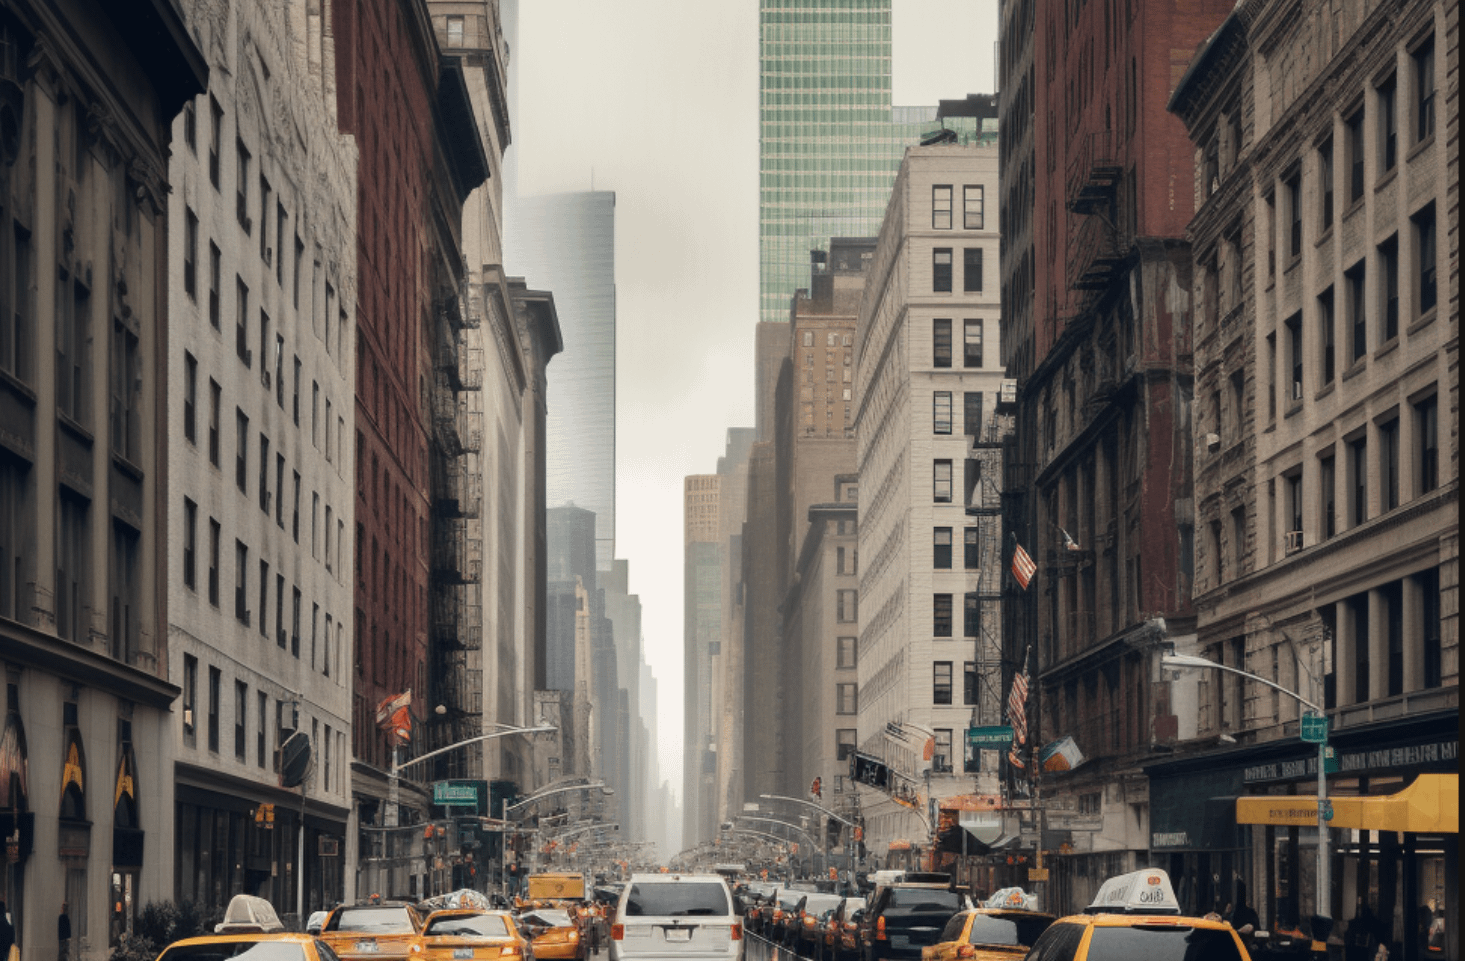 An NYC street view showing buildings and cars